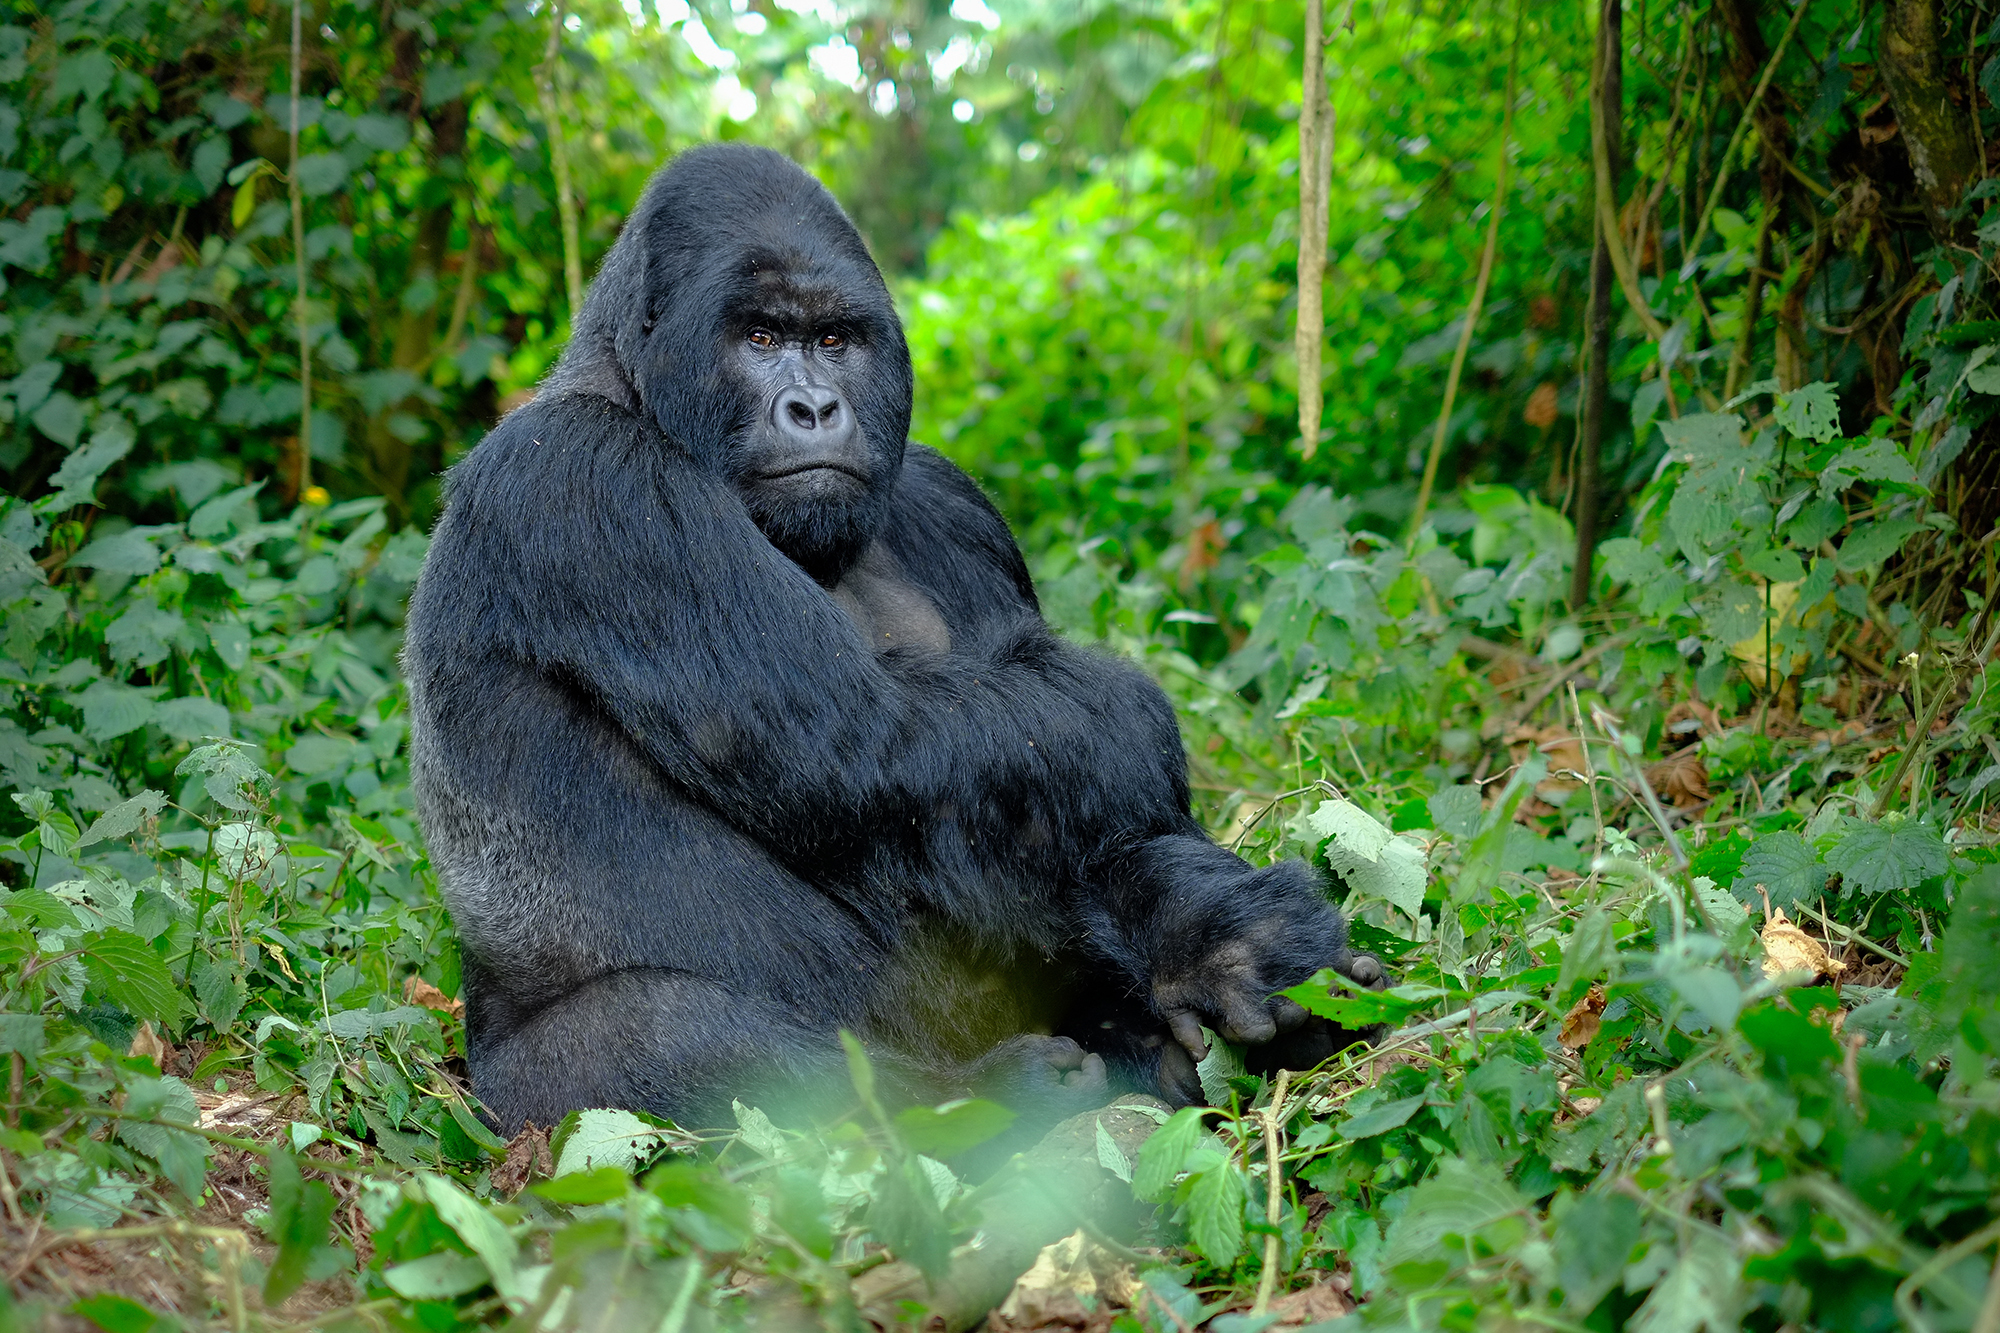 Photograph of a gorilla sitting in a green forest